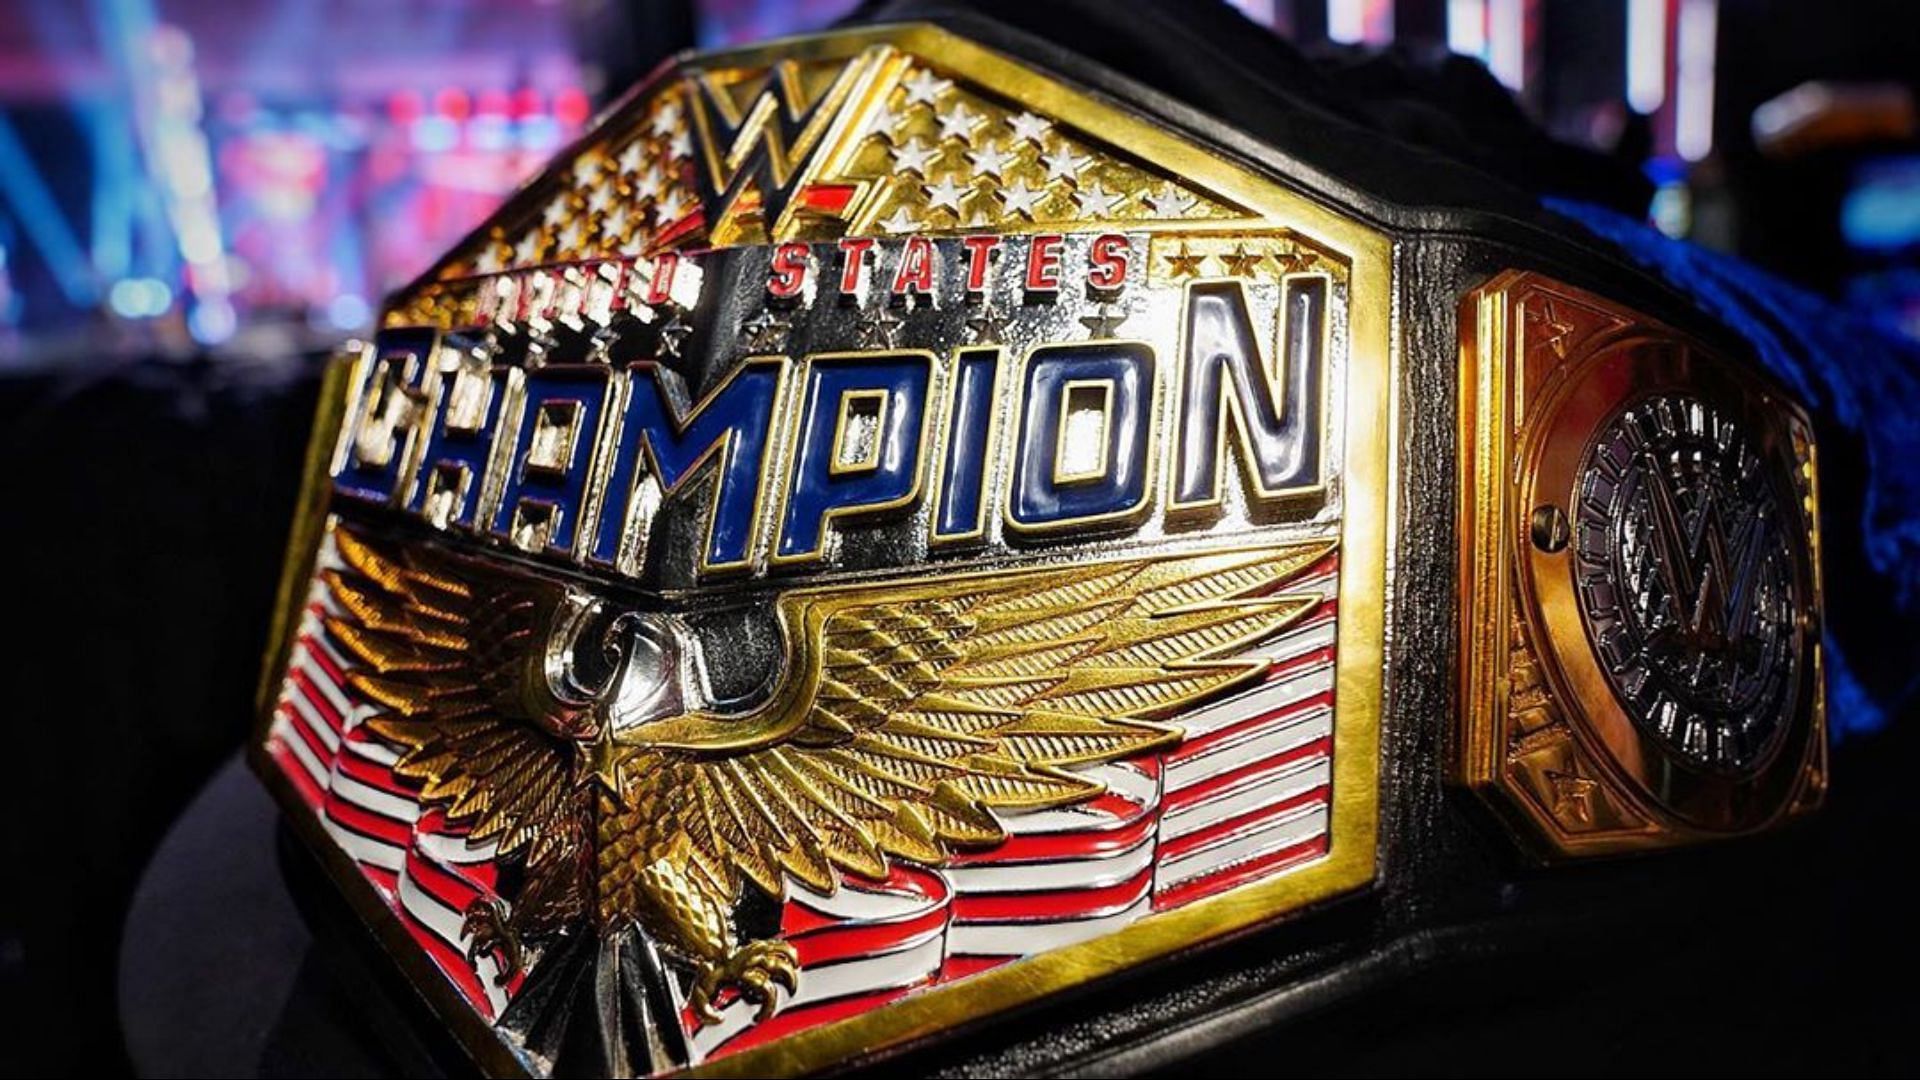 The United States Championship is one of WWE